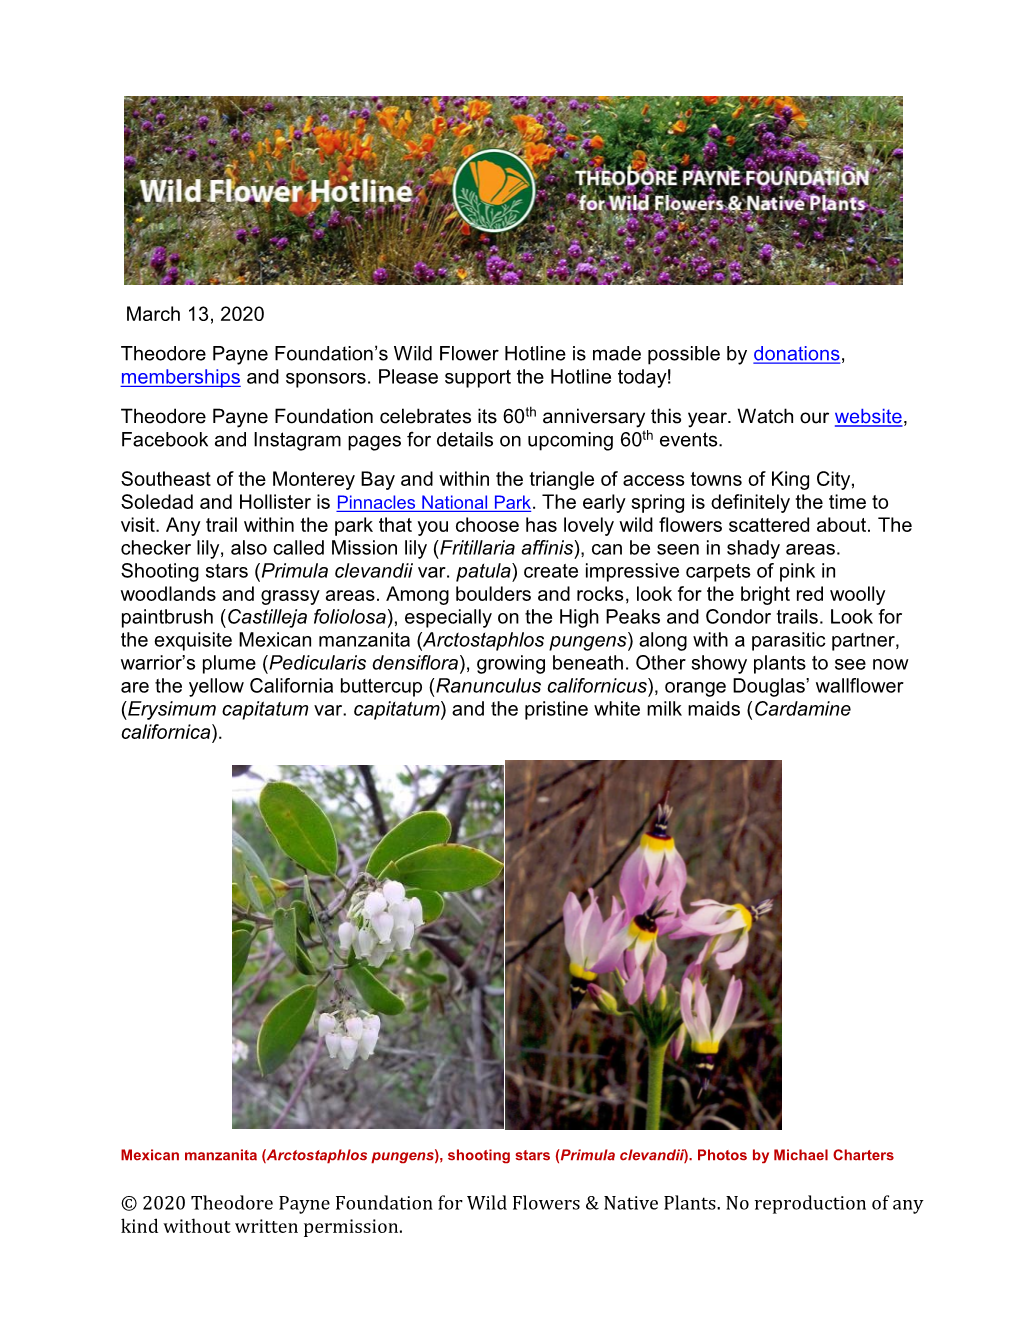 © 2020 Theodore Payne Foundation for Wild Flowers & Native Plants. No